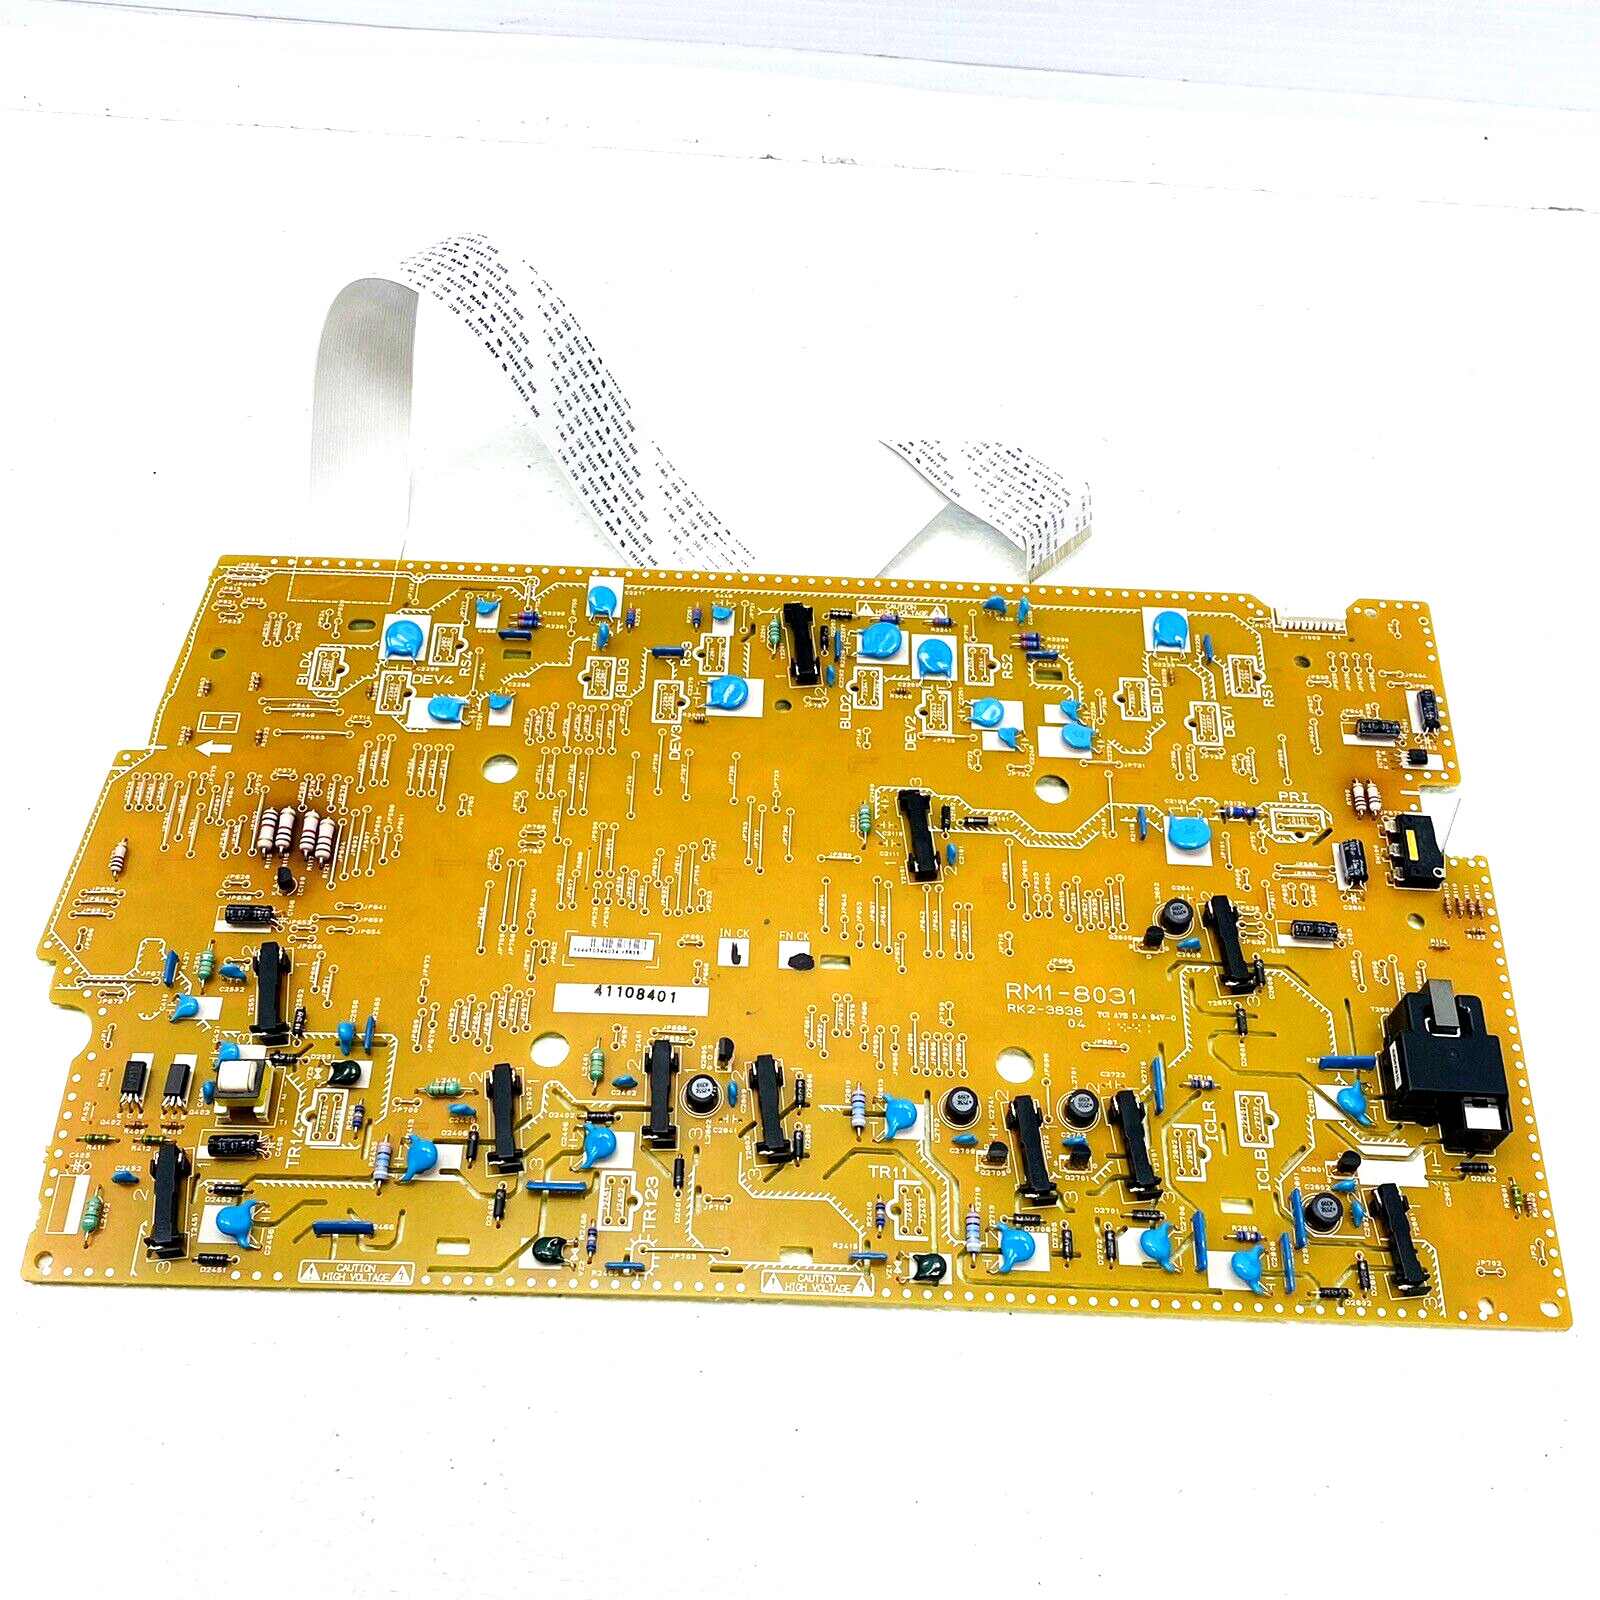 RM1-8031 MAIN PCA Driver Board for HP Color LaserJet M476